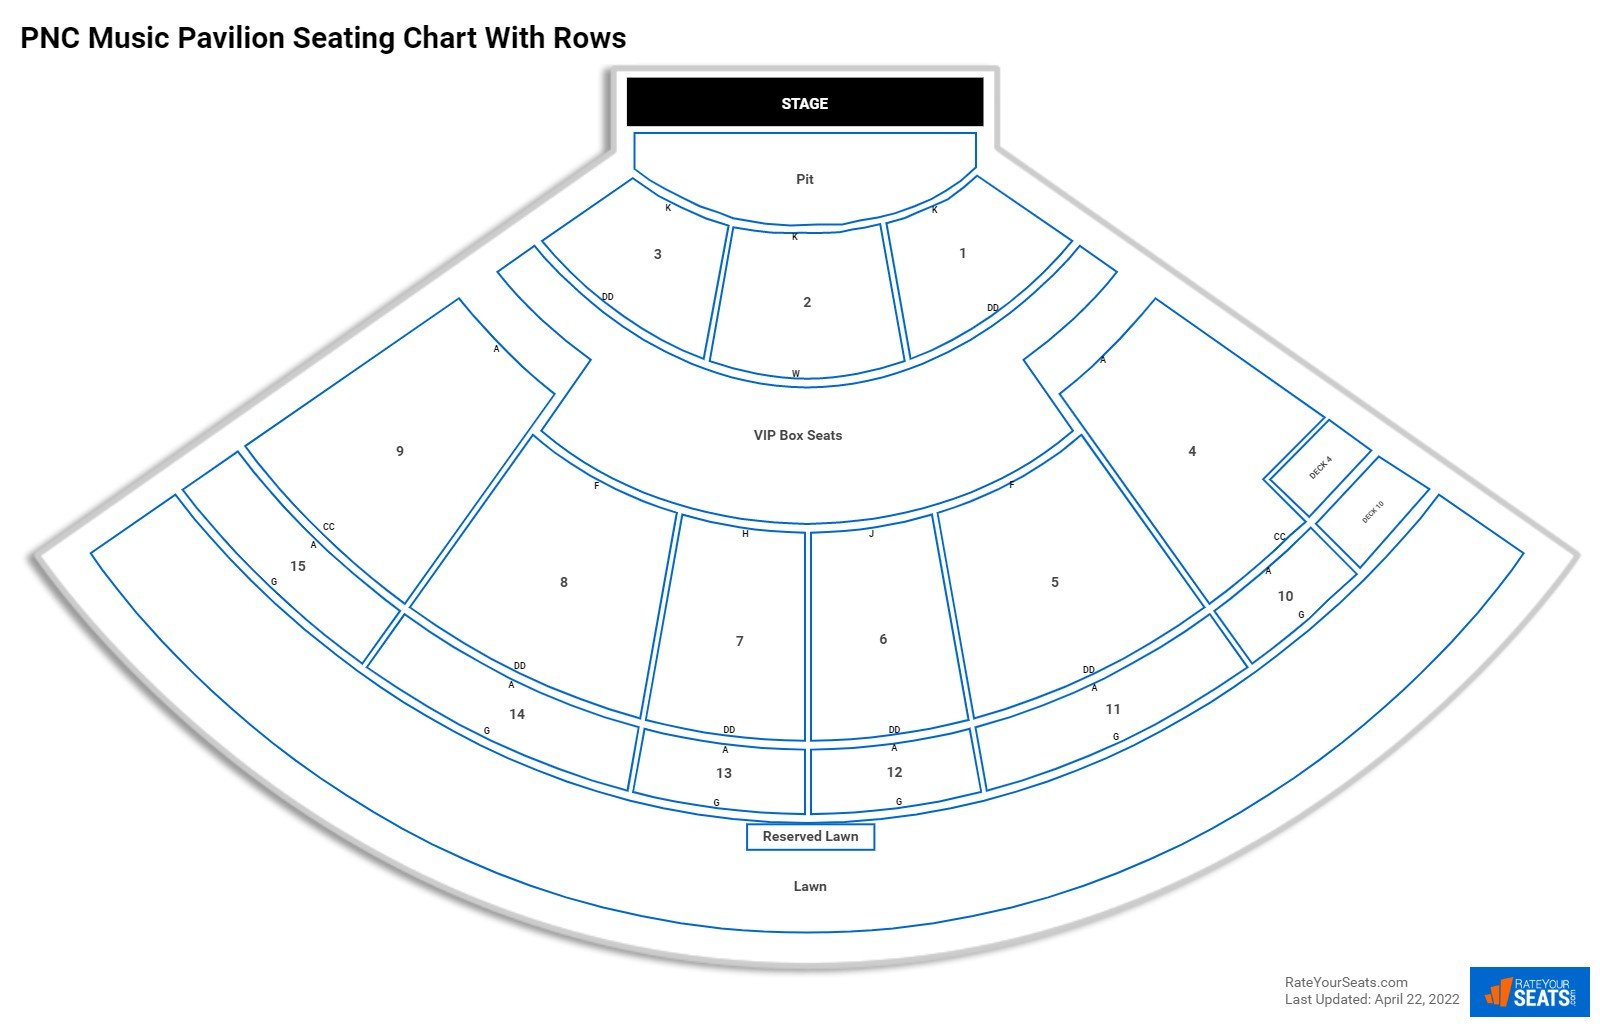 PNC Music Pavilion seating chart with row numbers